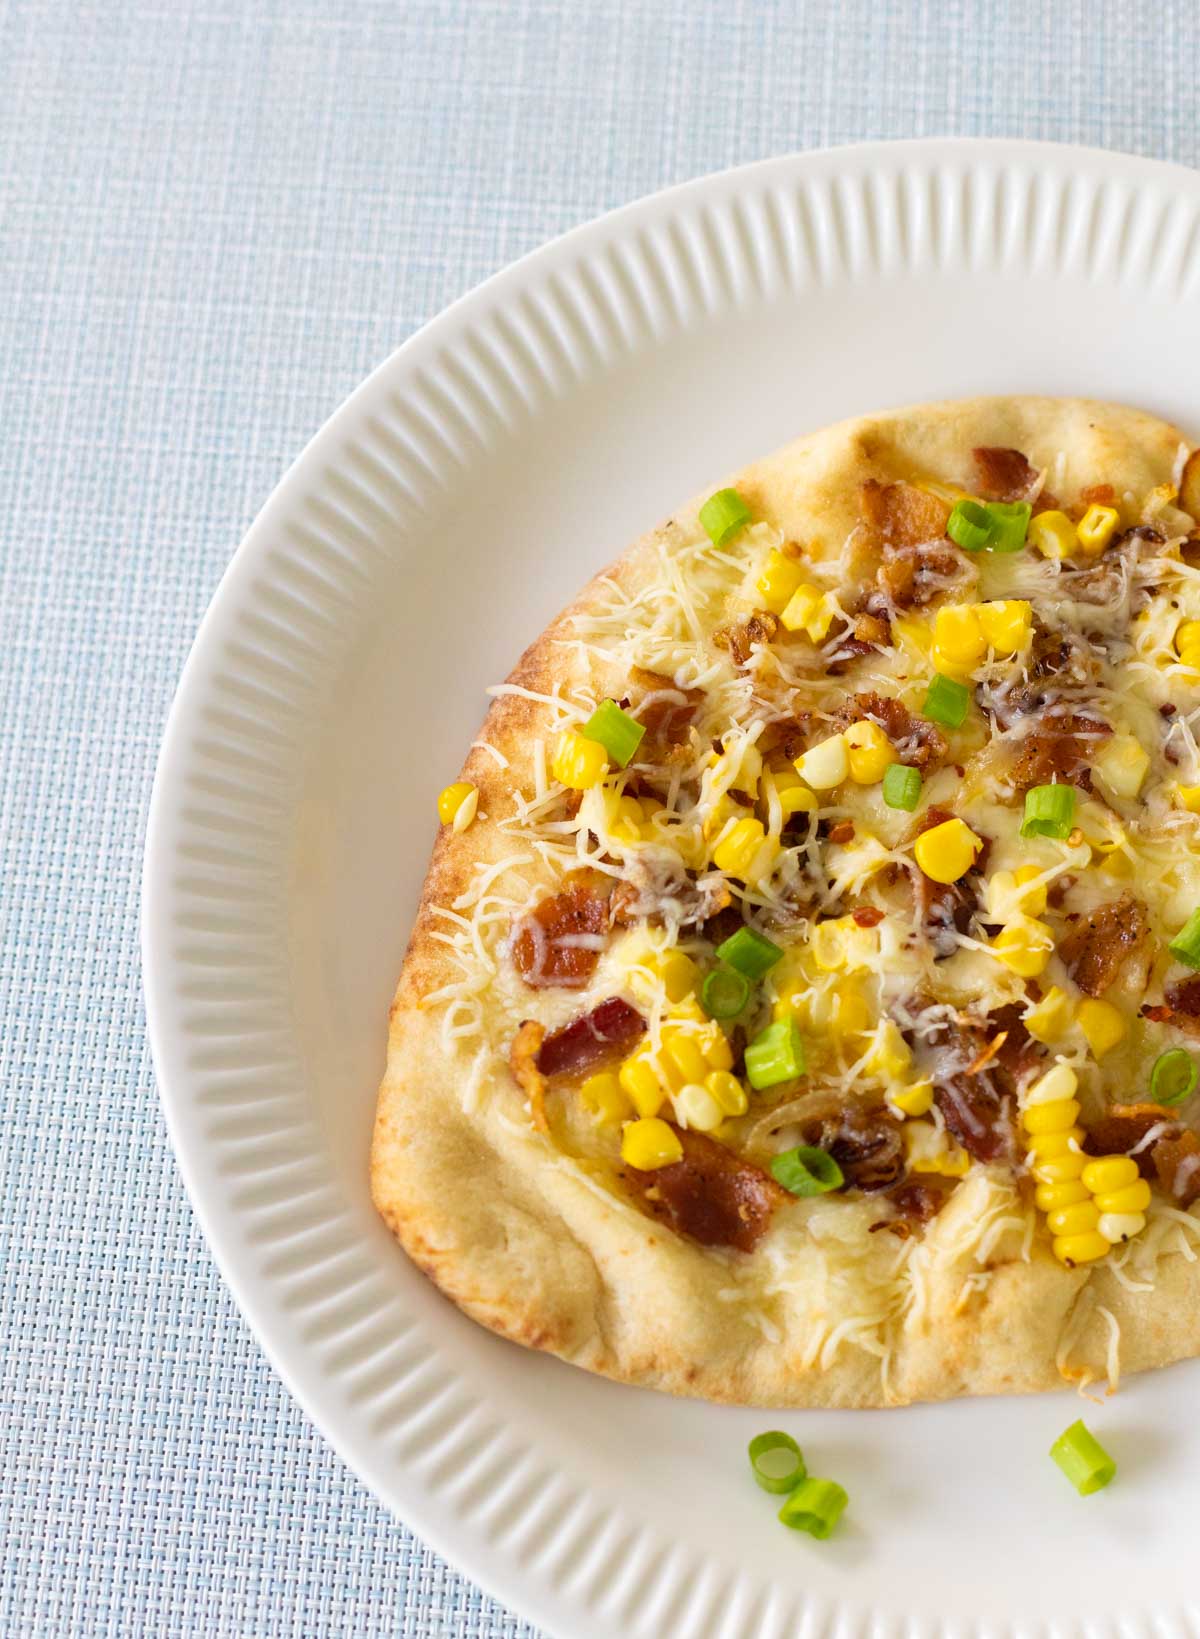 The baked sweet corn pizza is being served on a white plate.